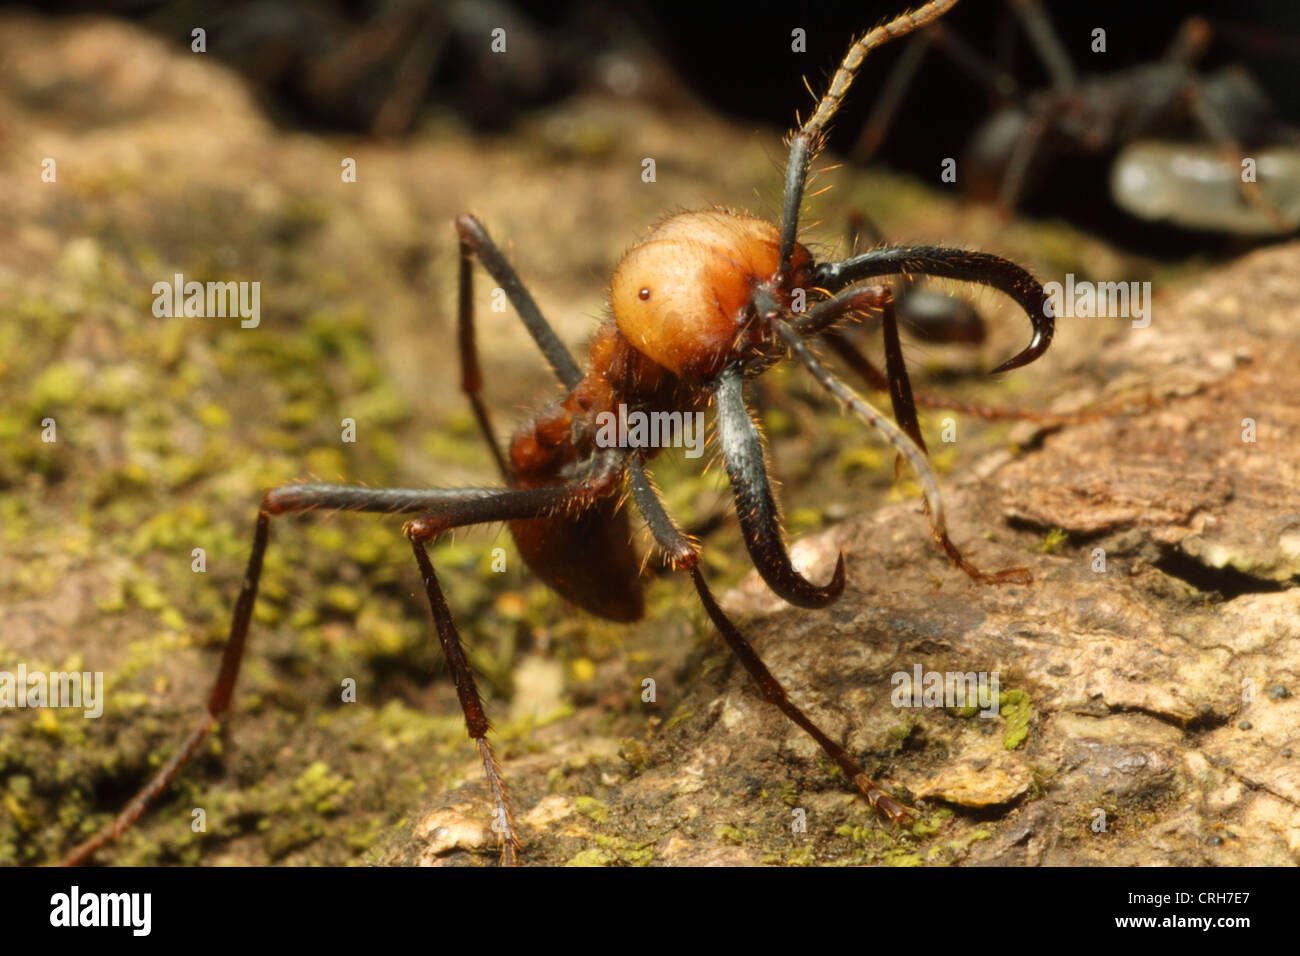 Army ant soldier stands guard while workers carry food back to bivouac. Rincon de la Vieja National Park, Guanacaste,Costa Rica. Stock Photo